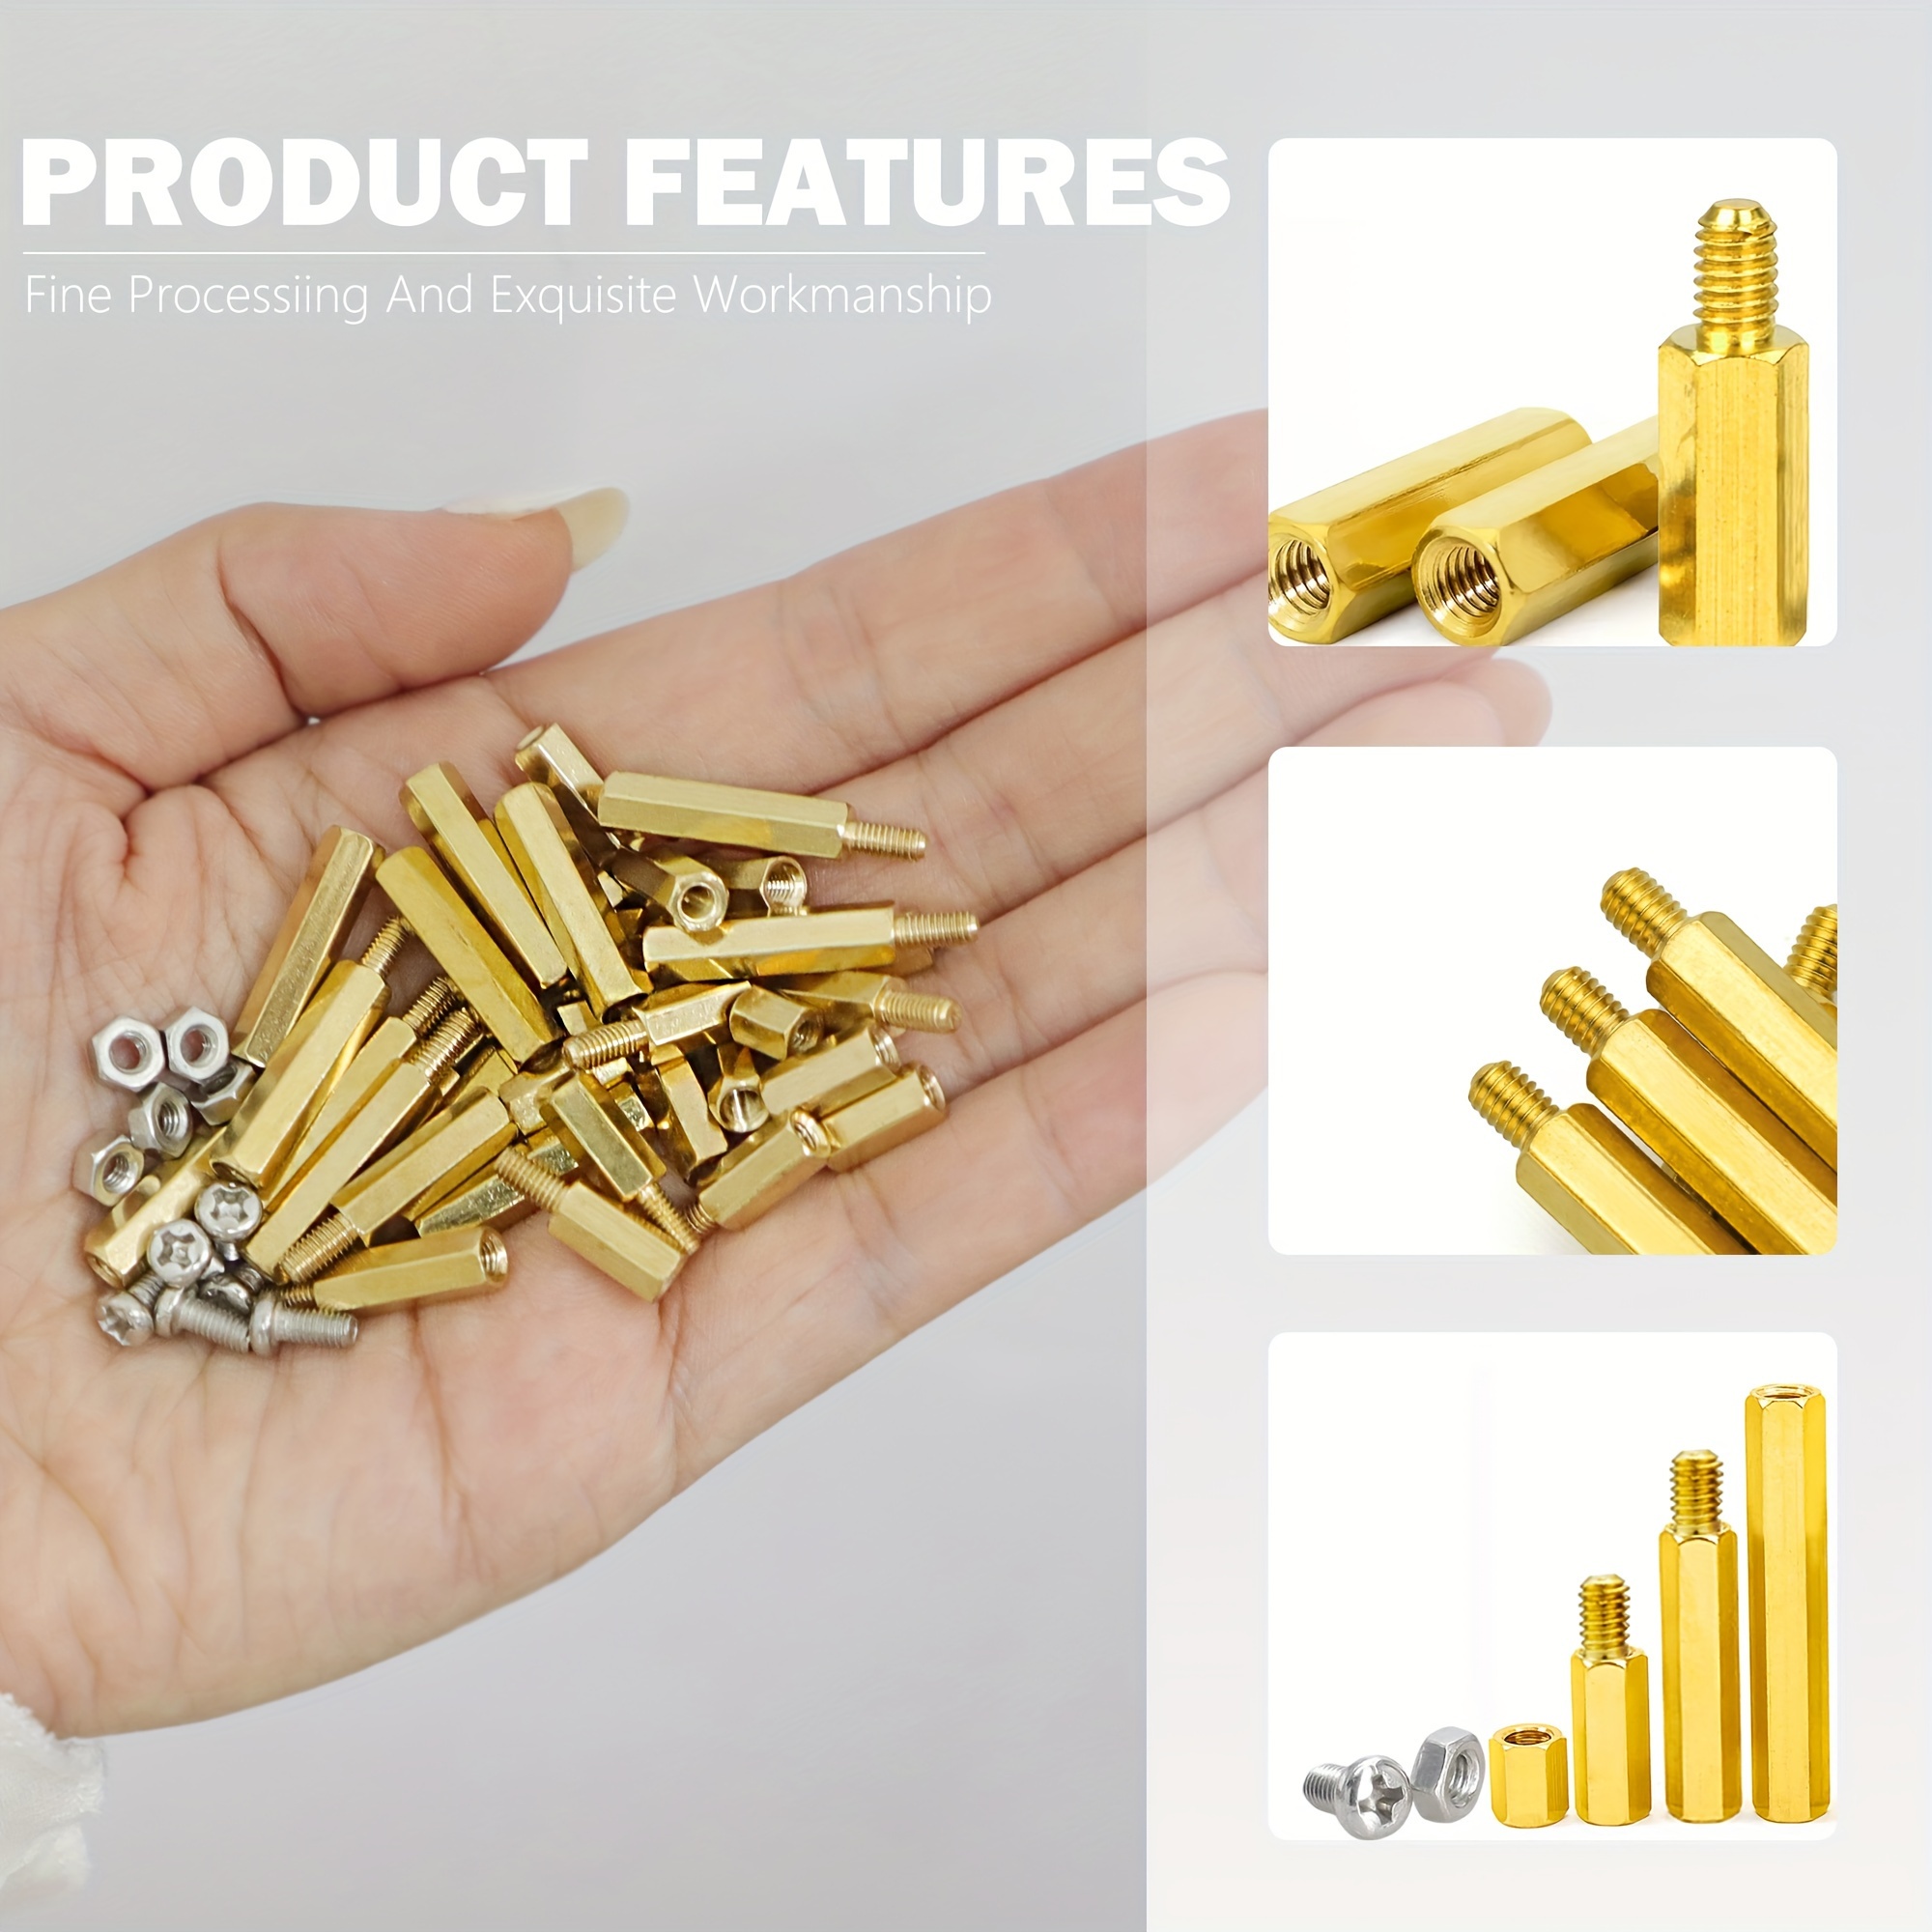  Augiimor 30PCS Male Female Hex Brass Spacer Standoff Screw Nut  M3 x 25mm + 6mm PCB Motherboard Brass Standoff Hexagonal Spacer :  Everything Else